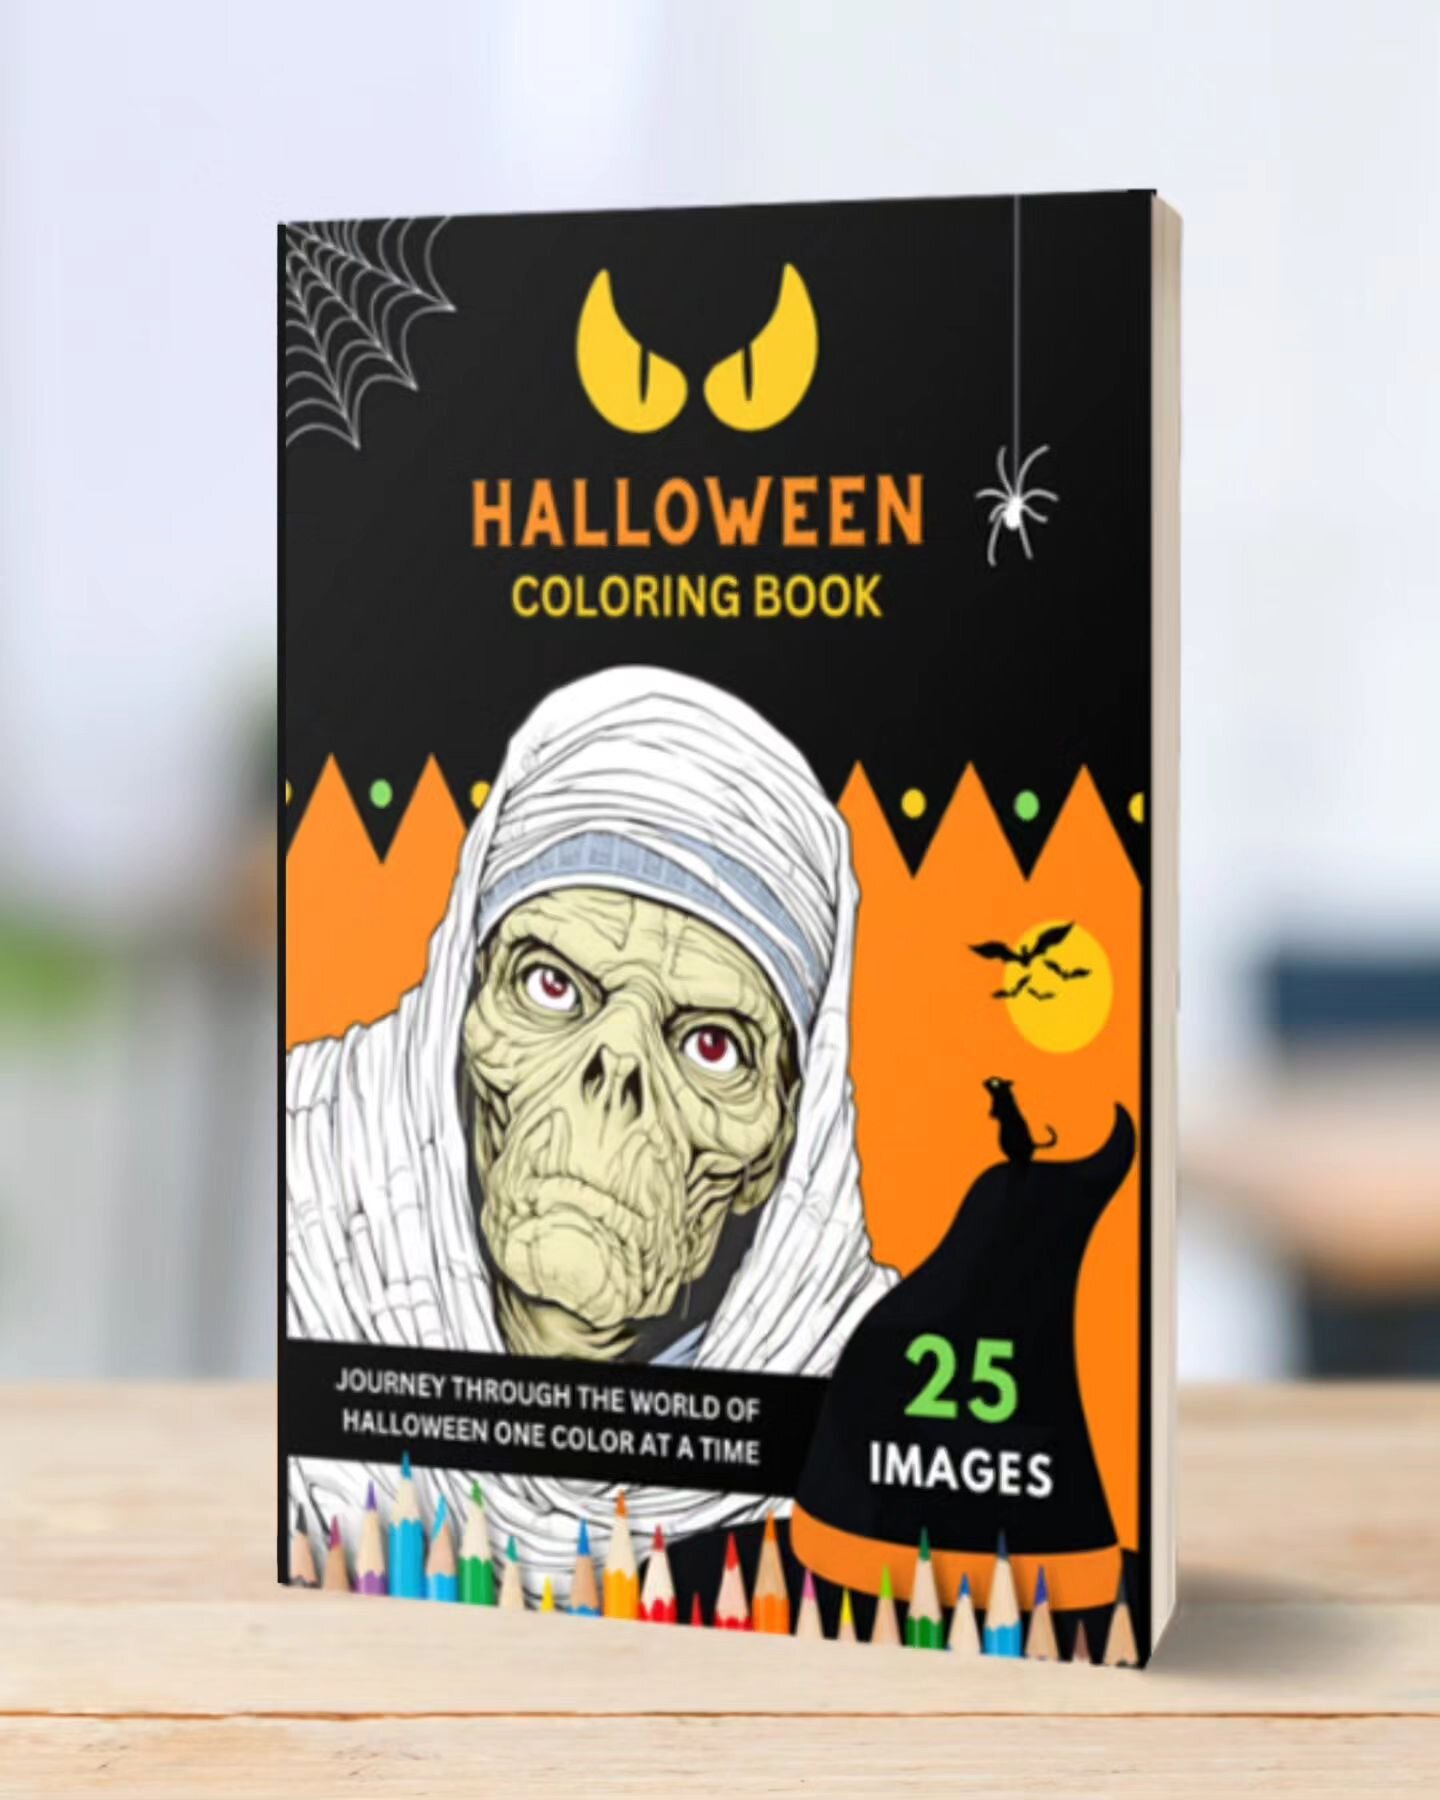 Unleash your creativity this spooky season with our newly launched #HalloweenColoringBook. Journey through the eerie world of Halloween, one color at a time. Get yours today - Link in bio.
.
.
.
#Halloween2023 #ColoringBook